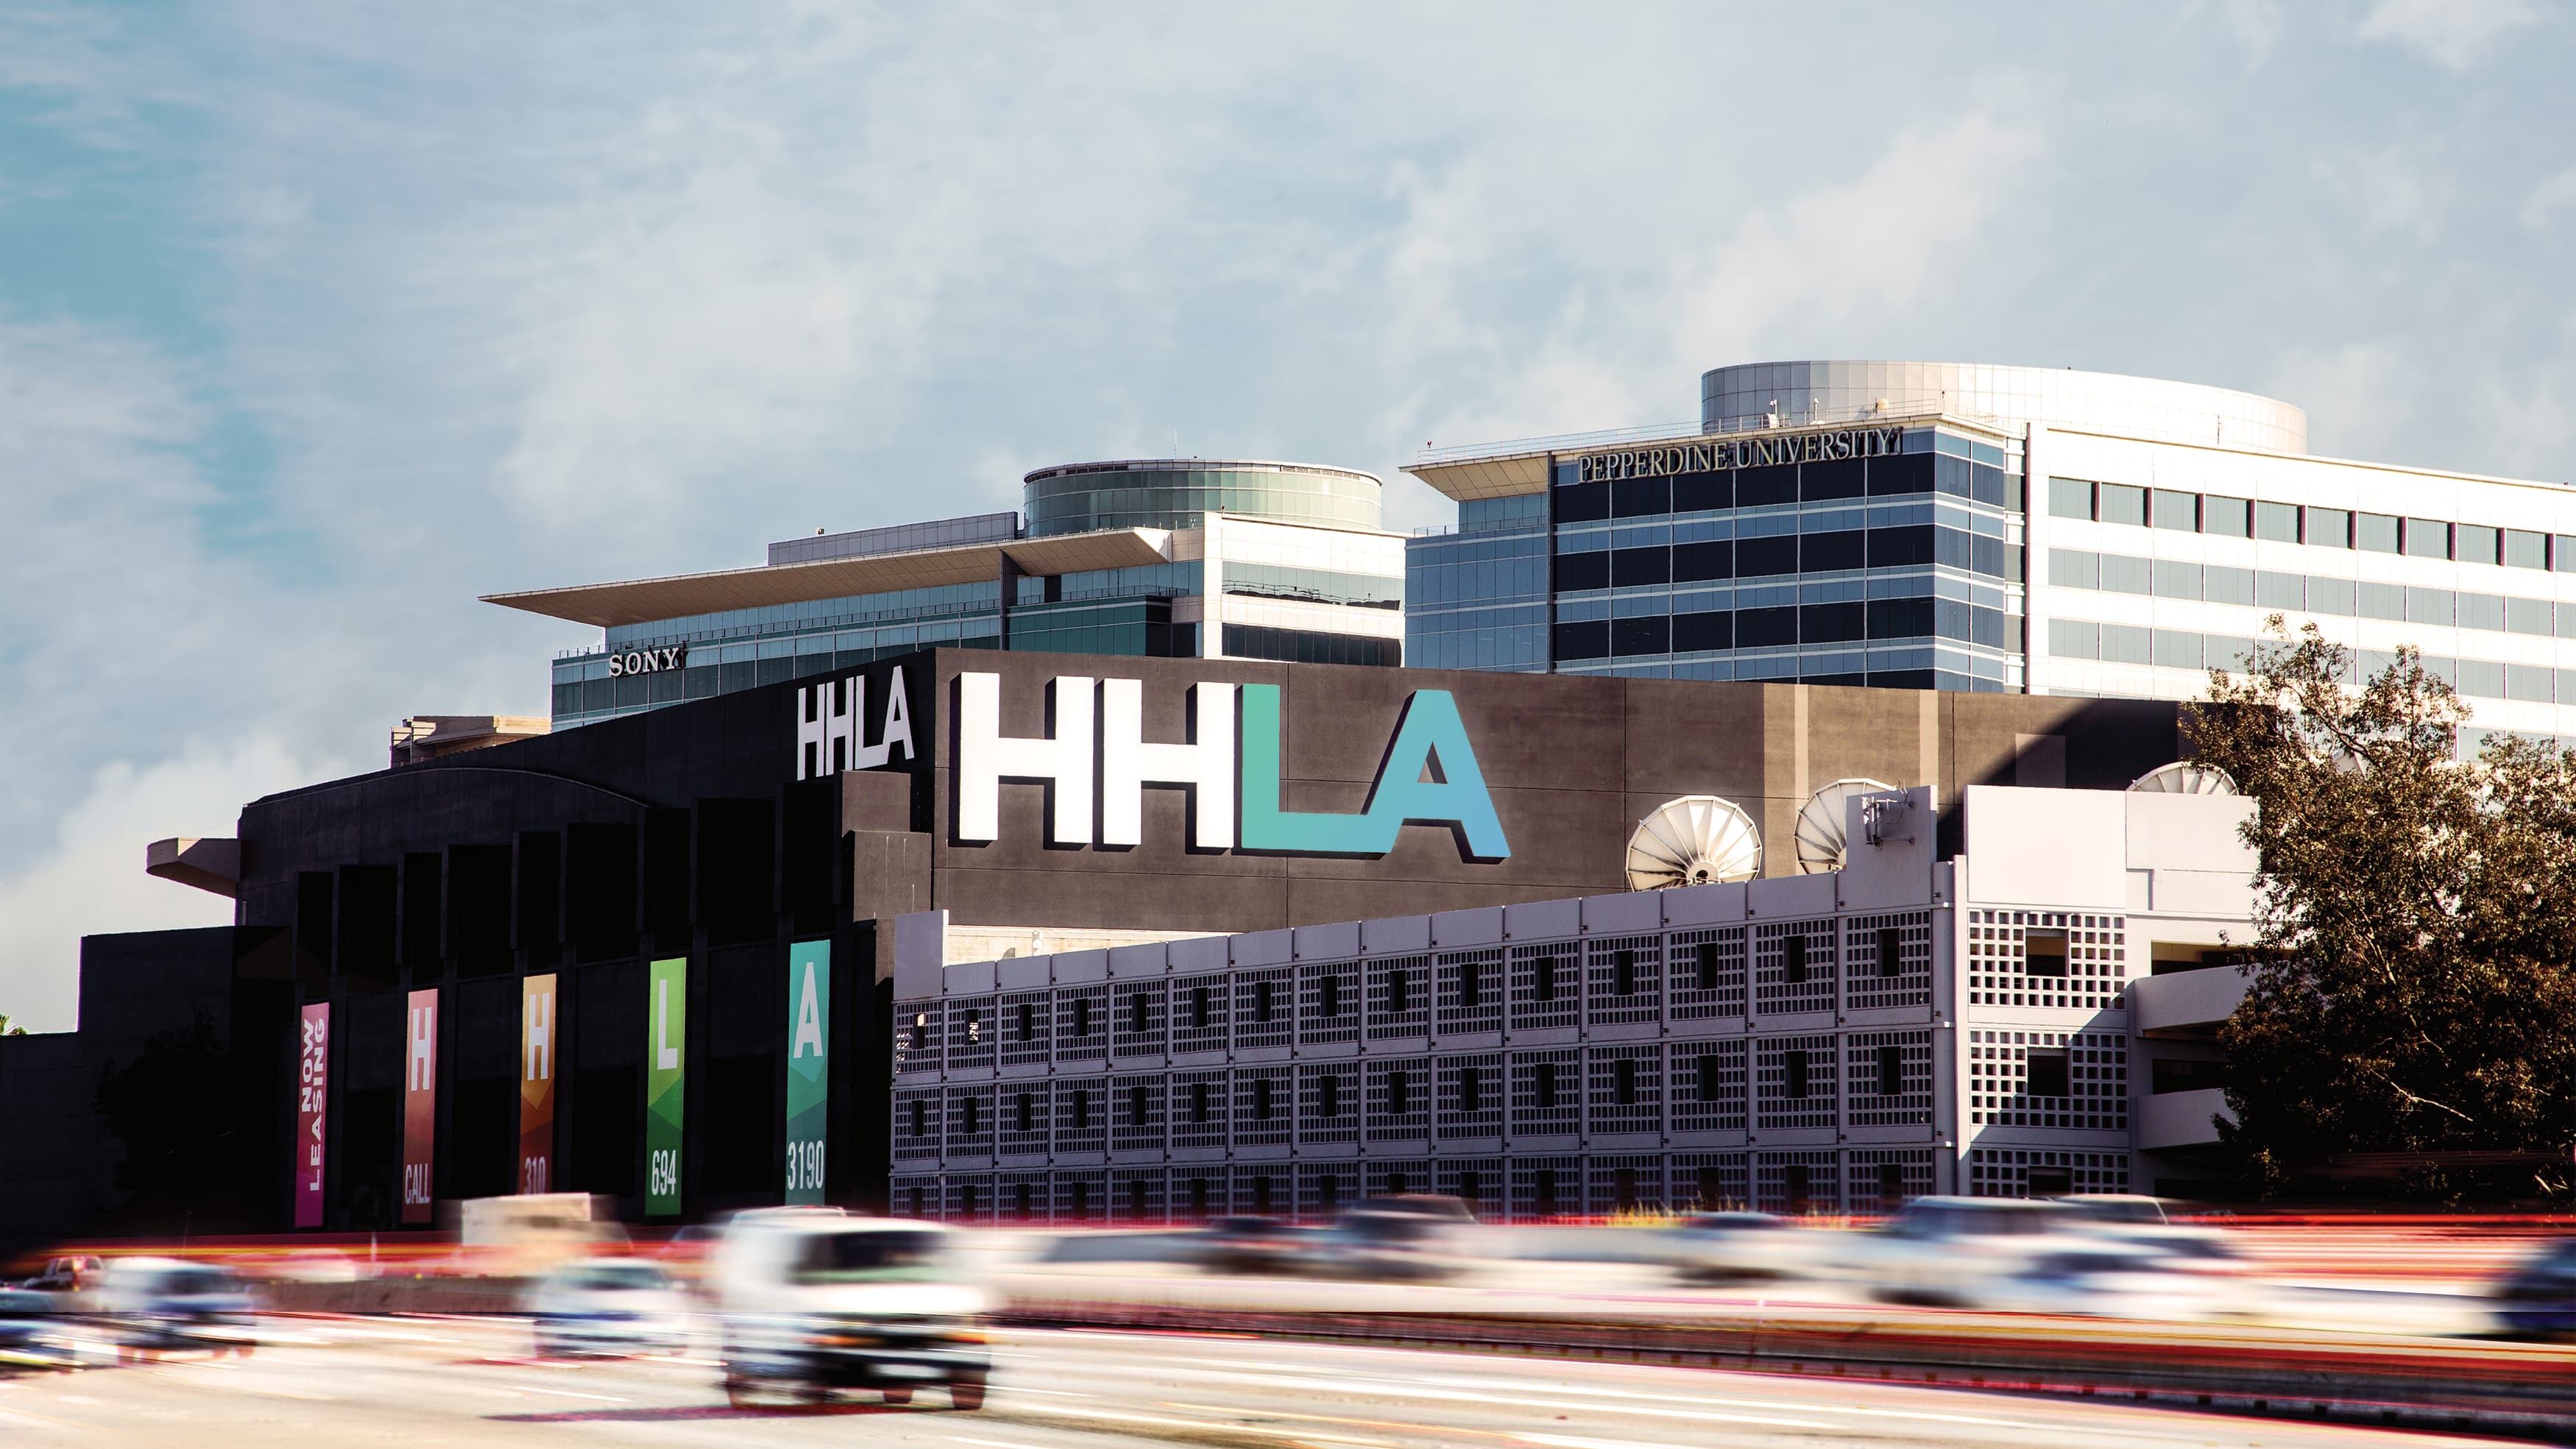 HHLA project from across the 5 freeway, with giant identity facing outward.